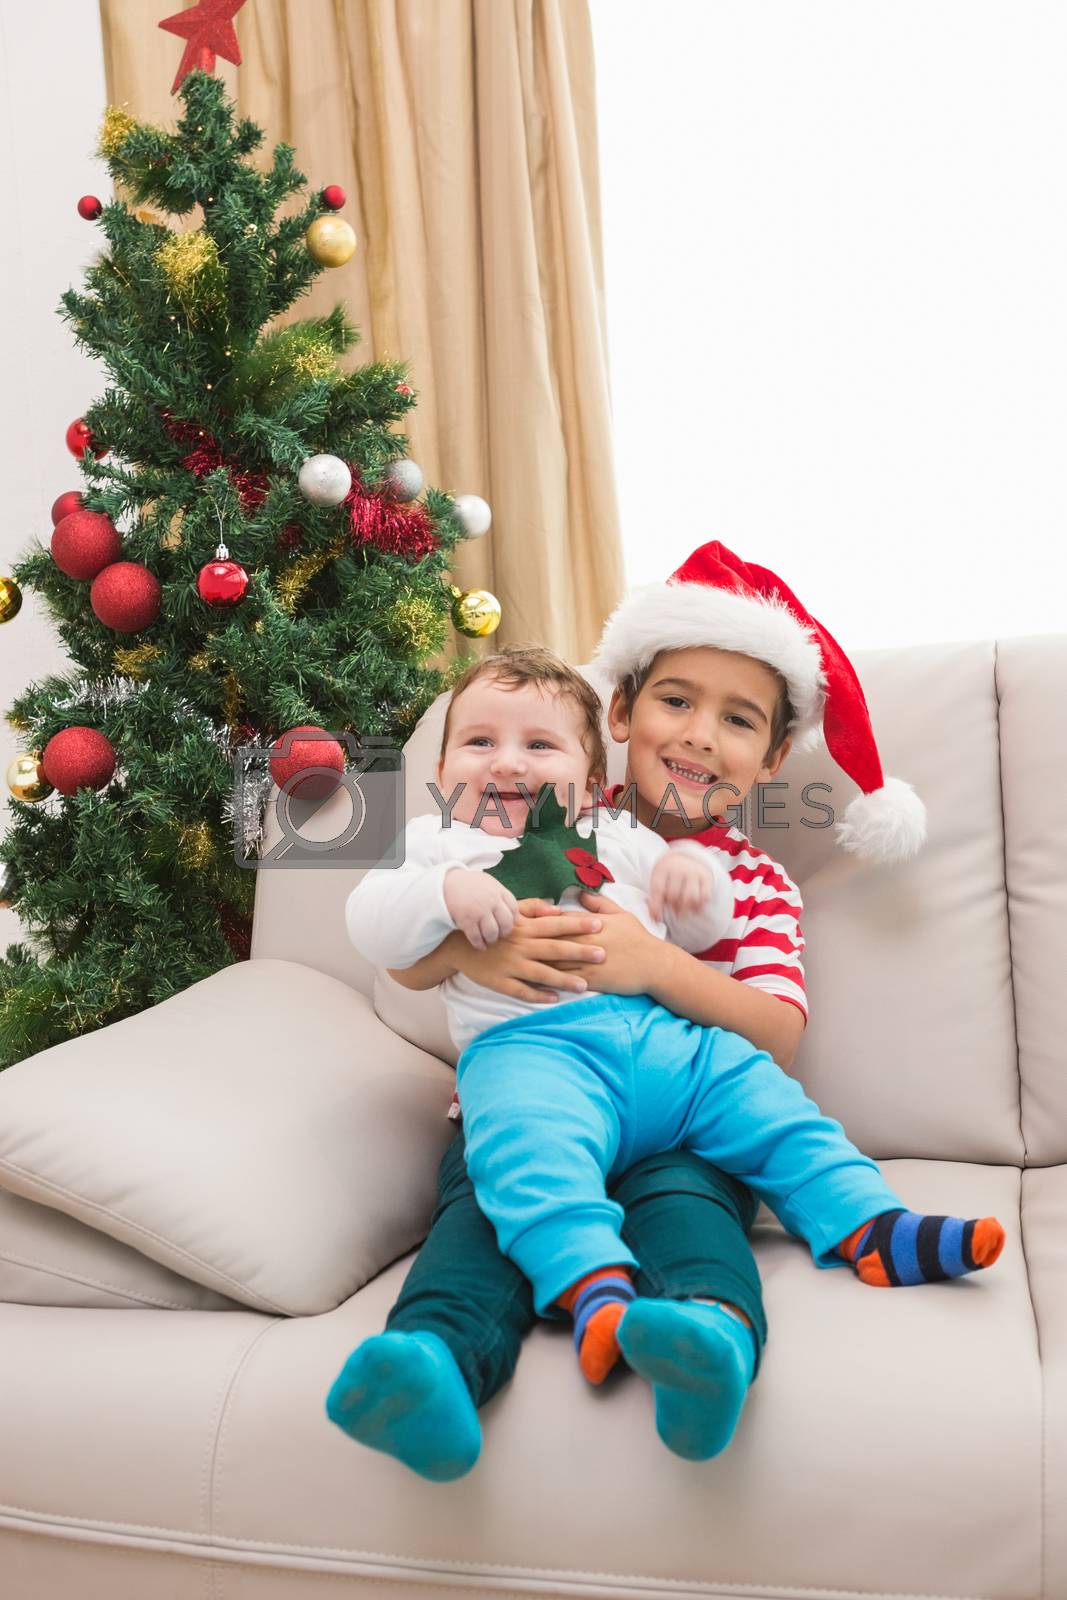 Royalty free image of Cute boy and baby brother on couch at christmas by Wavebreakmedia